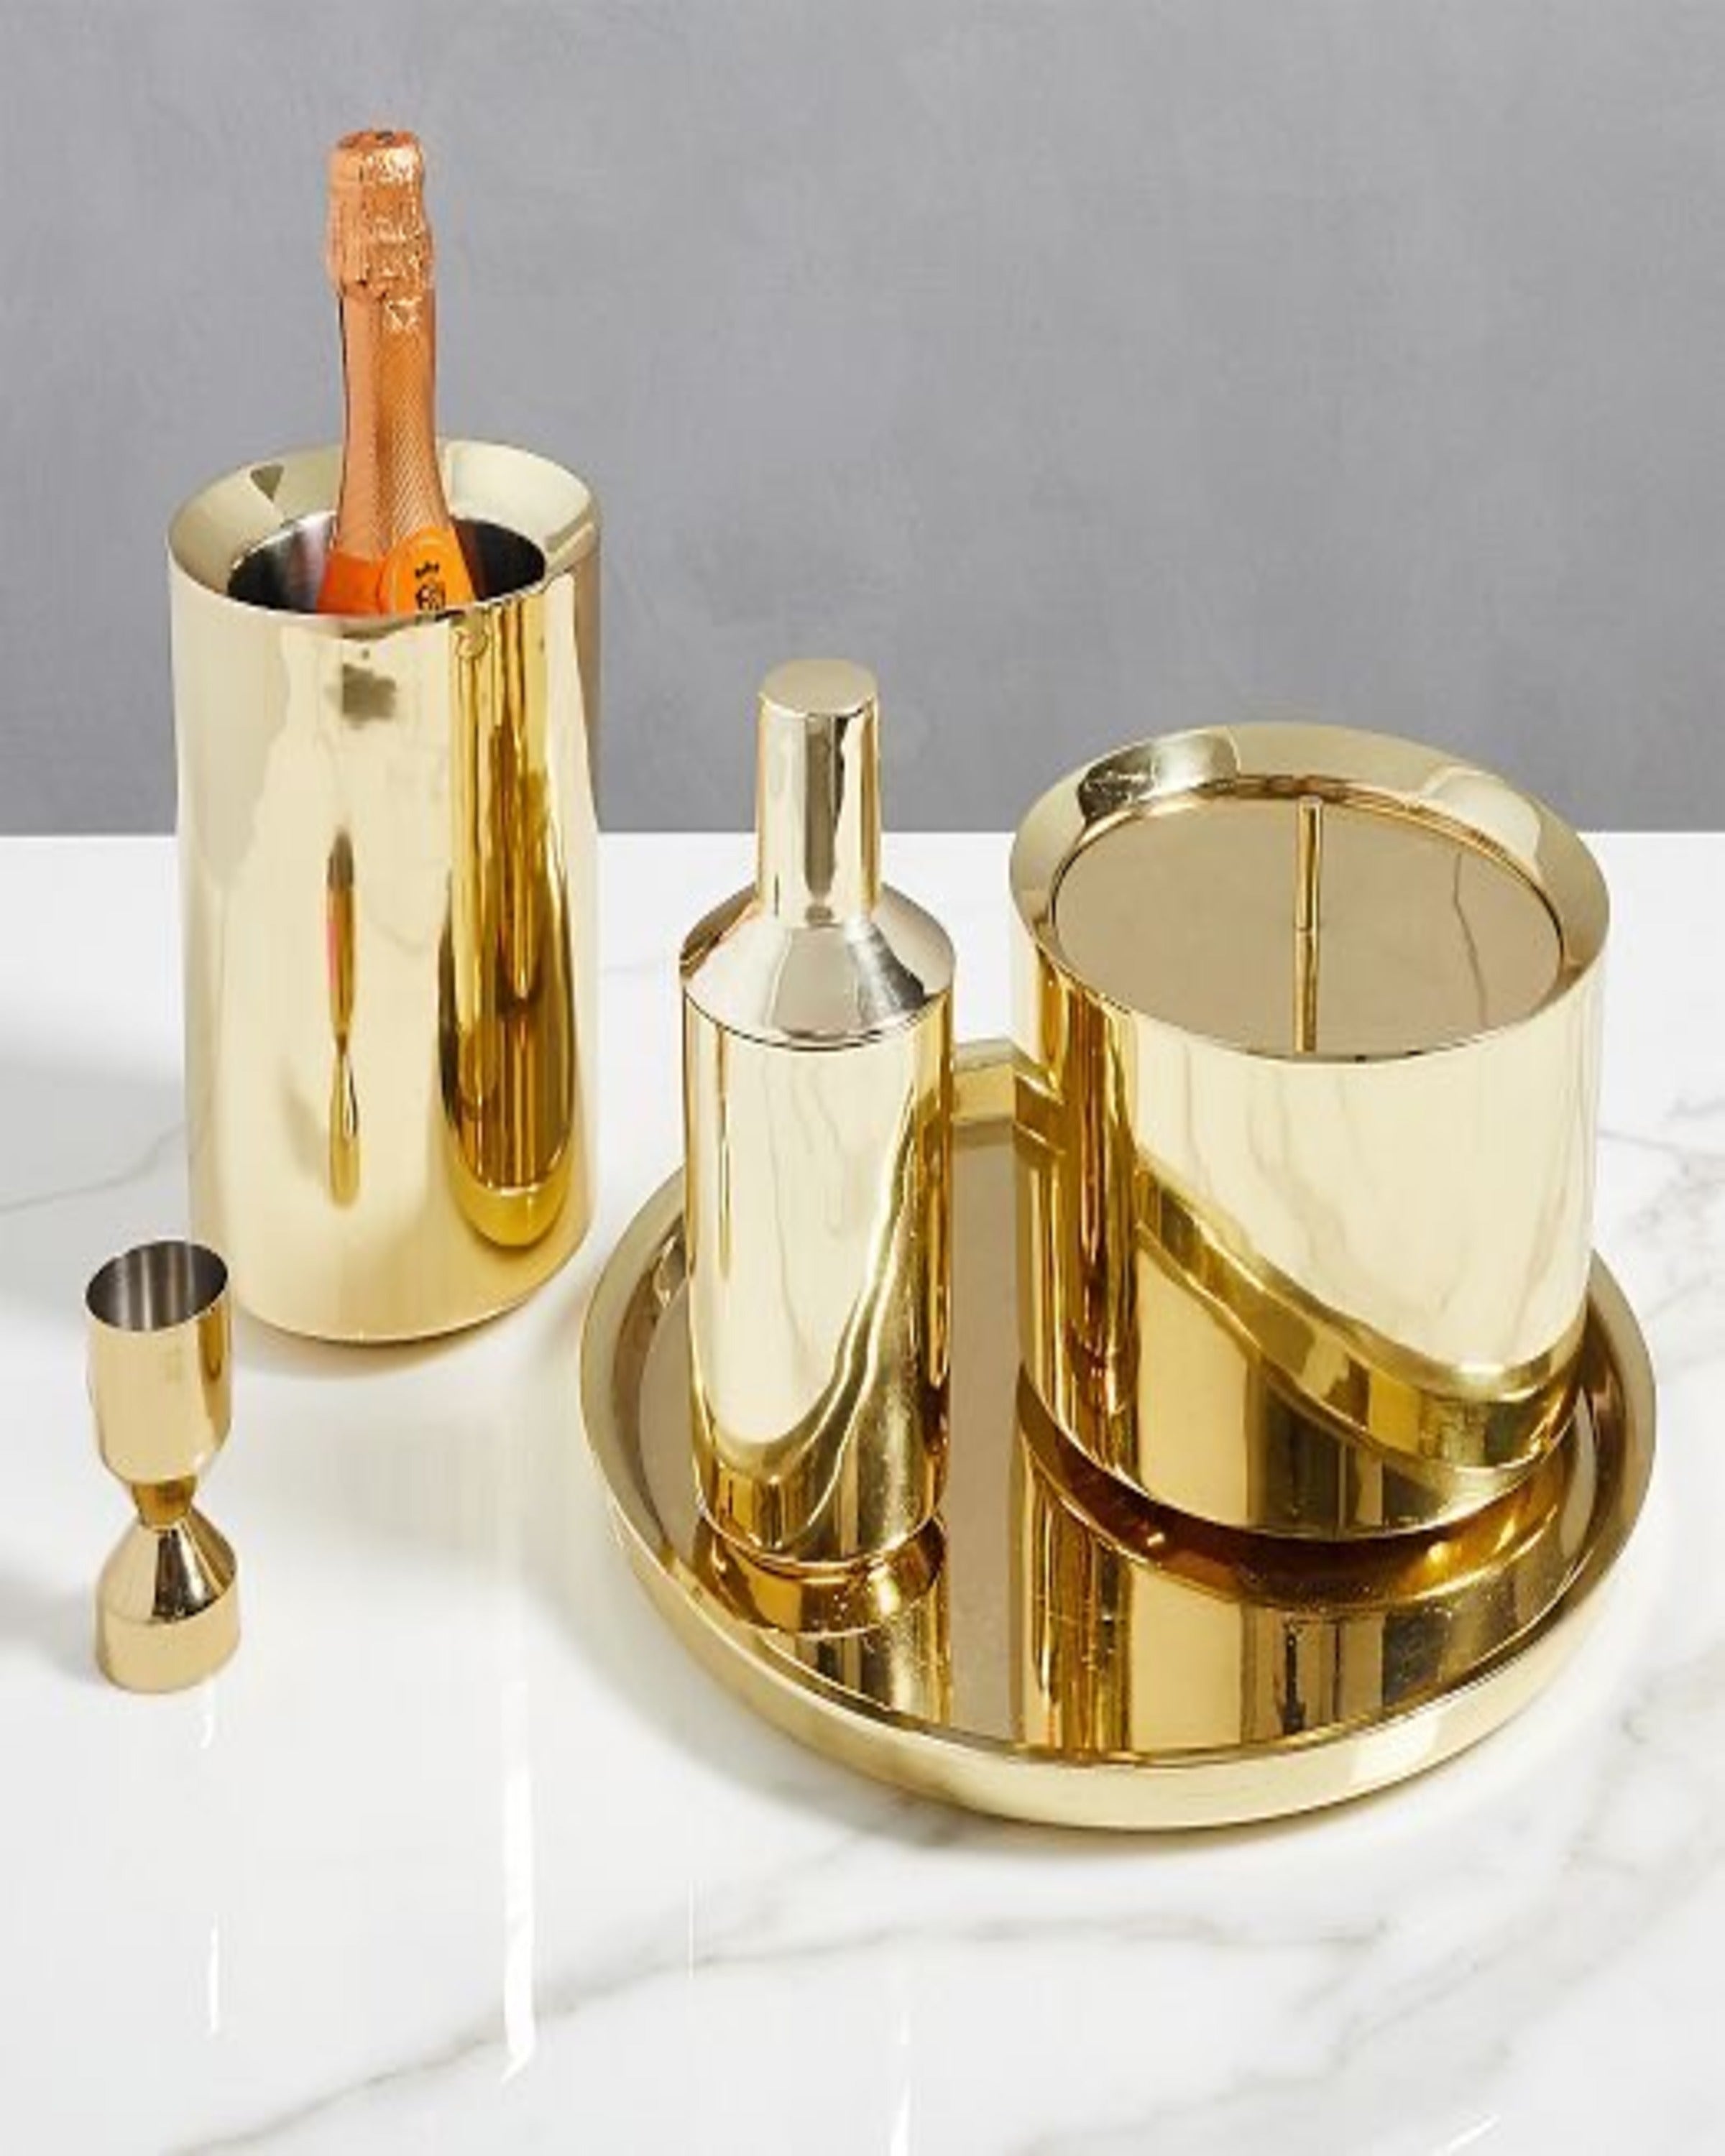 SipSmith Gold Finish Bar Accessories ANGIE HOMES